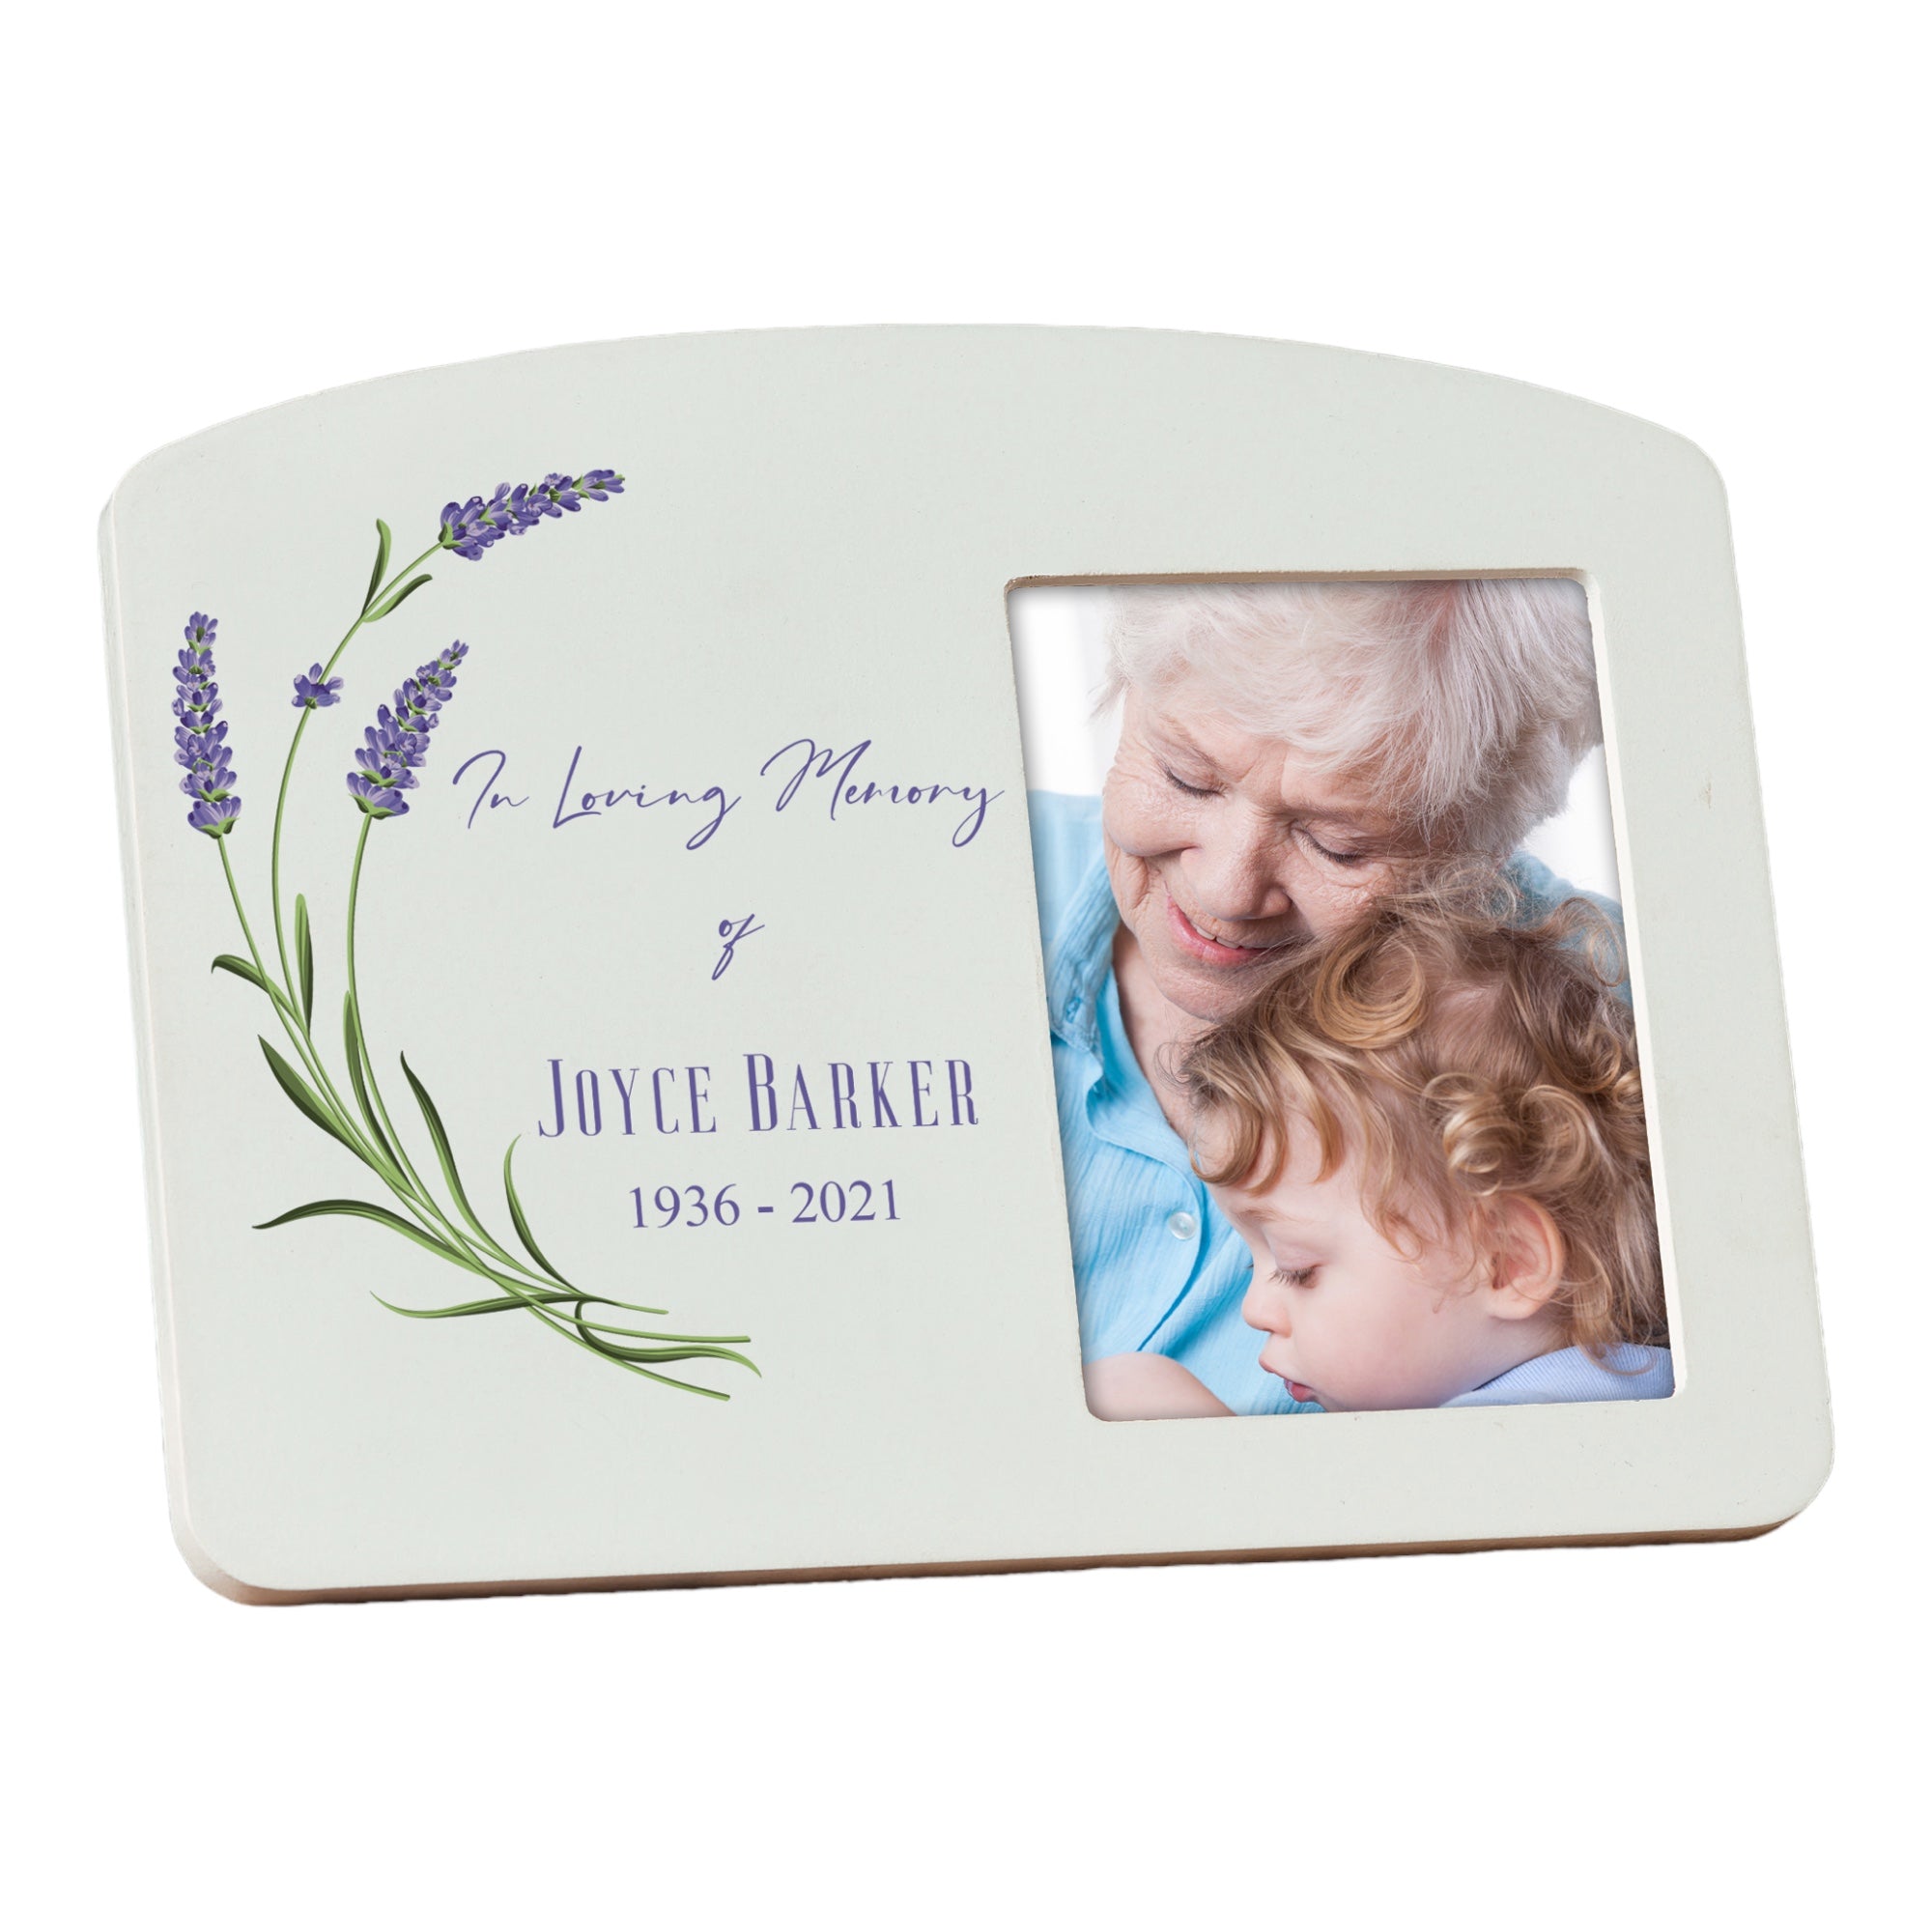 Personalised Memorial Remembrance Photo Frame With Lavenders